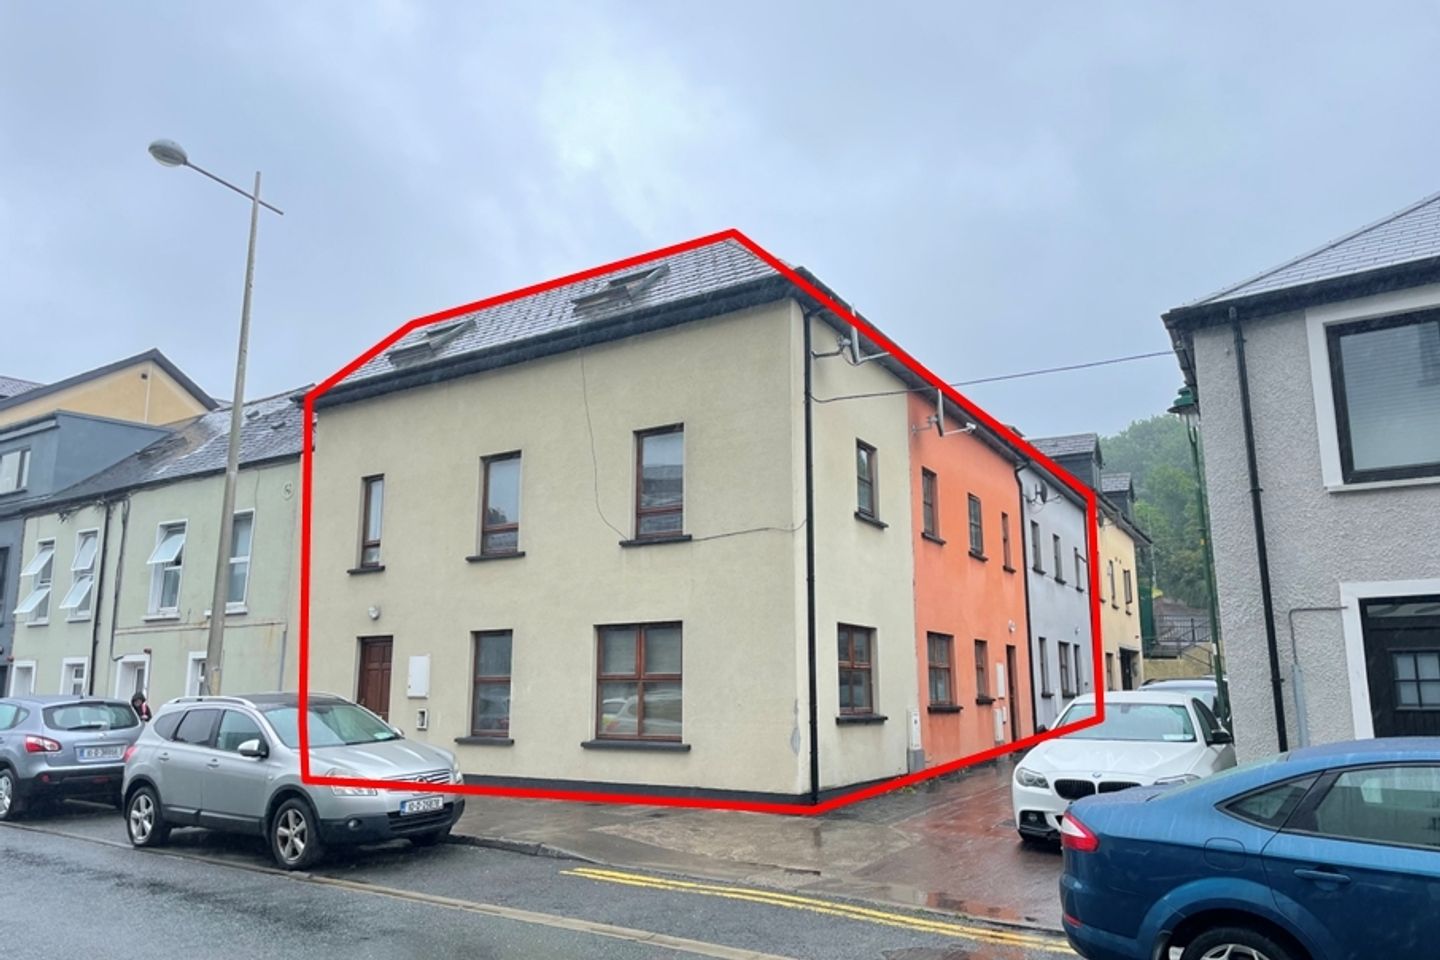 1, 2 & 3 The Gables, Watercourse Road, Blackpool, Co. Cork